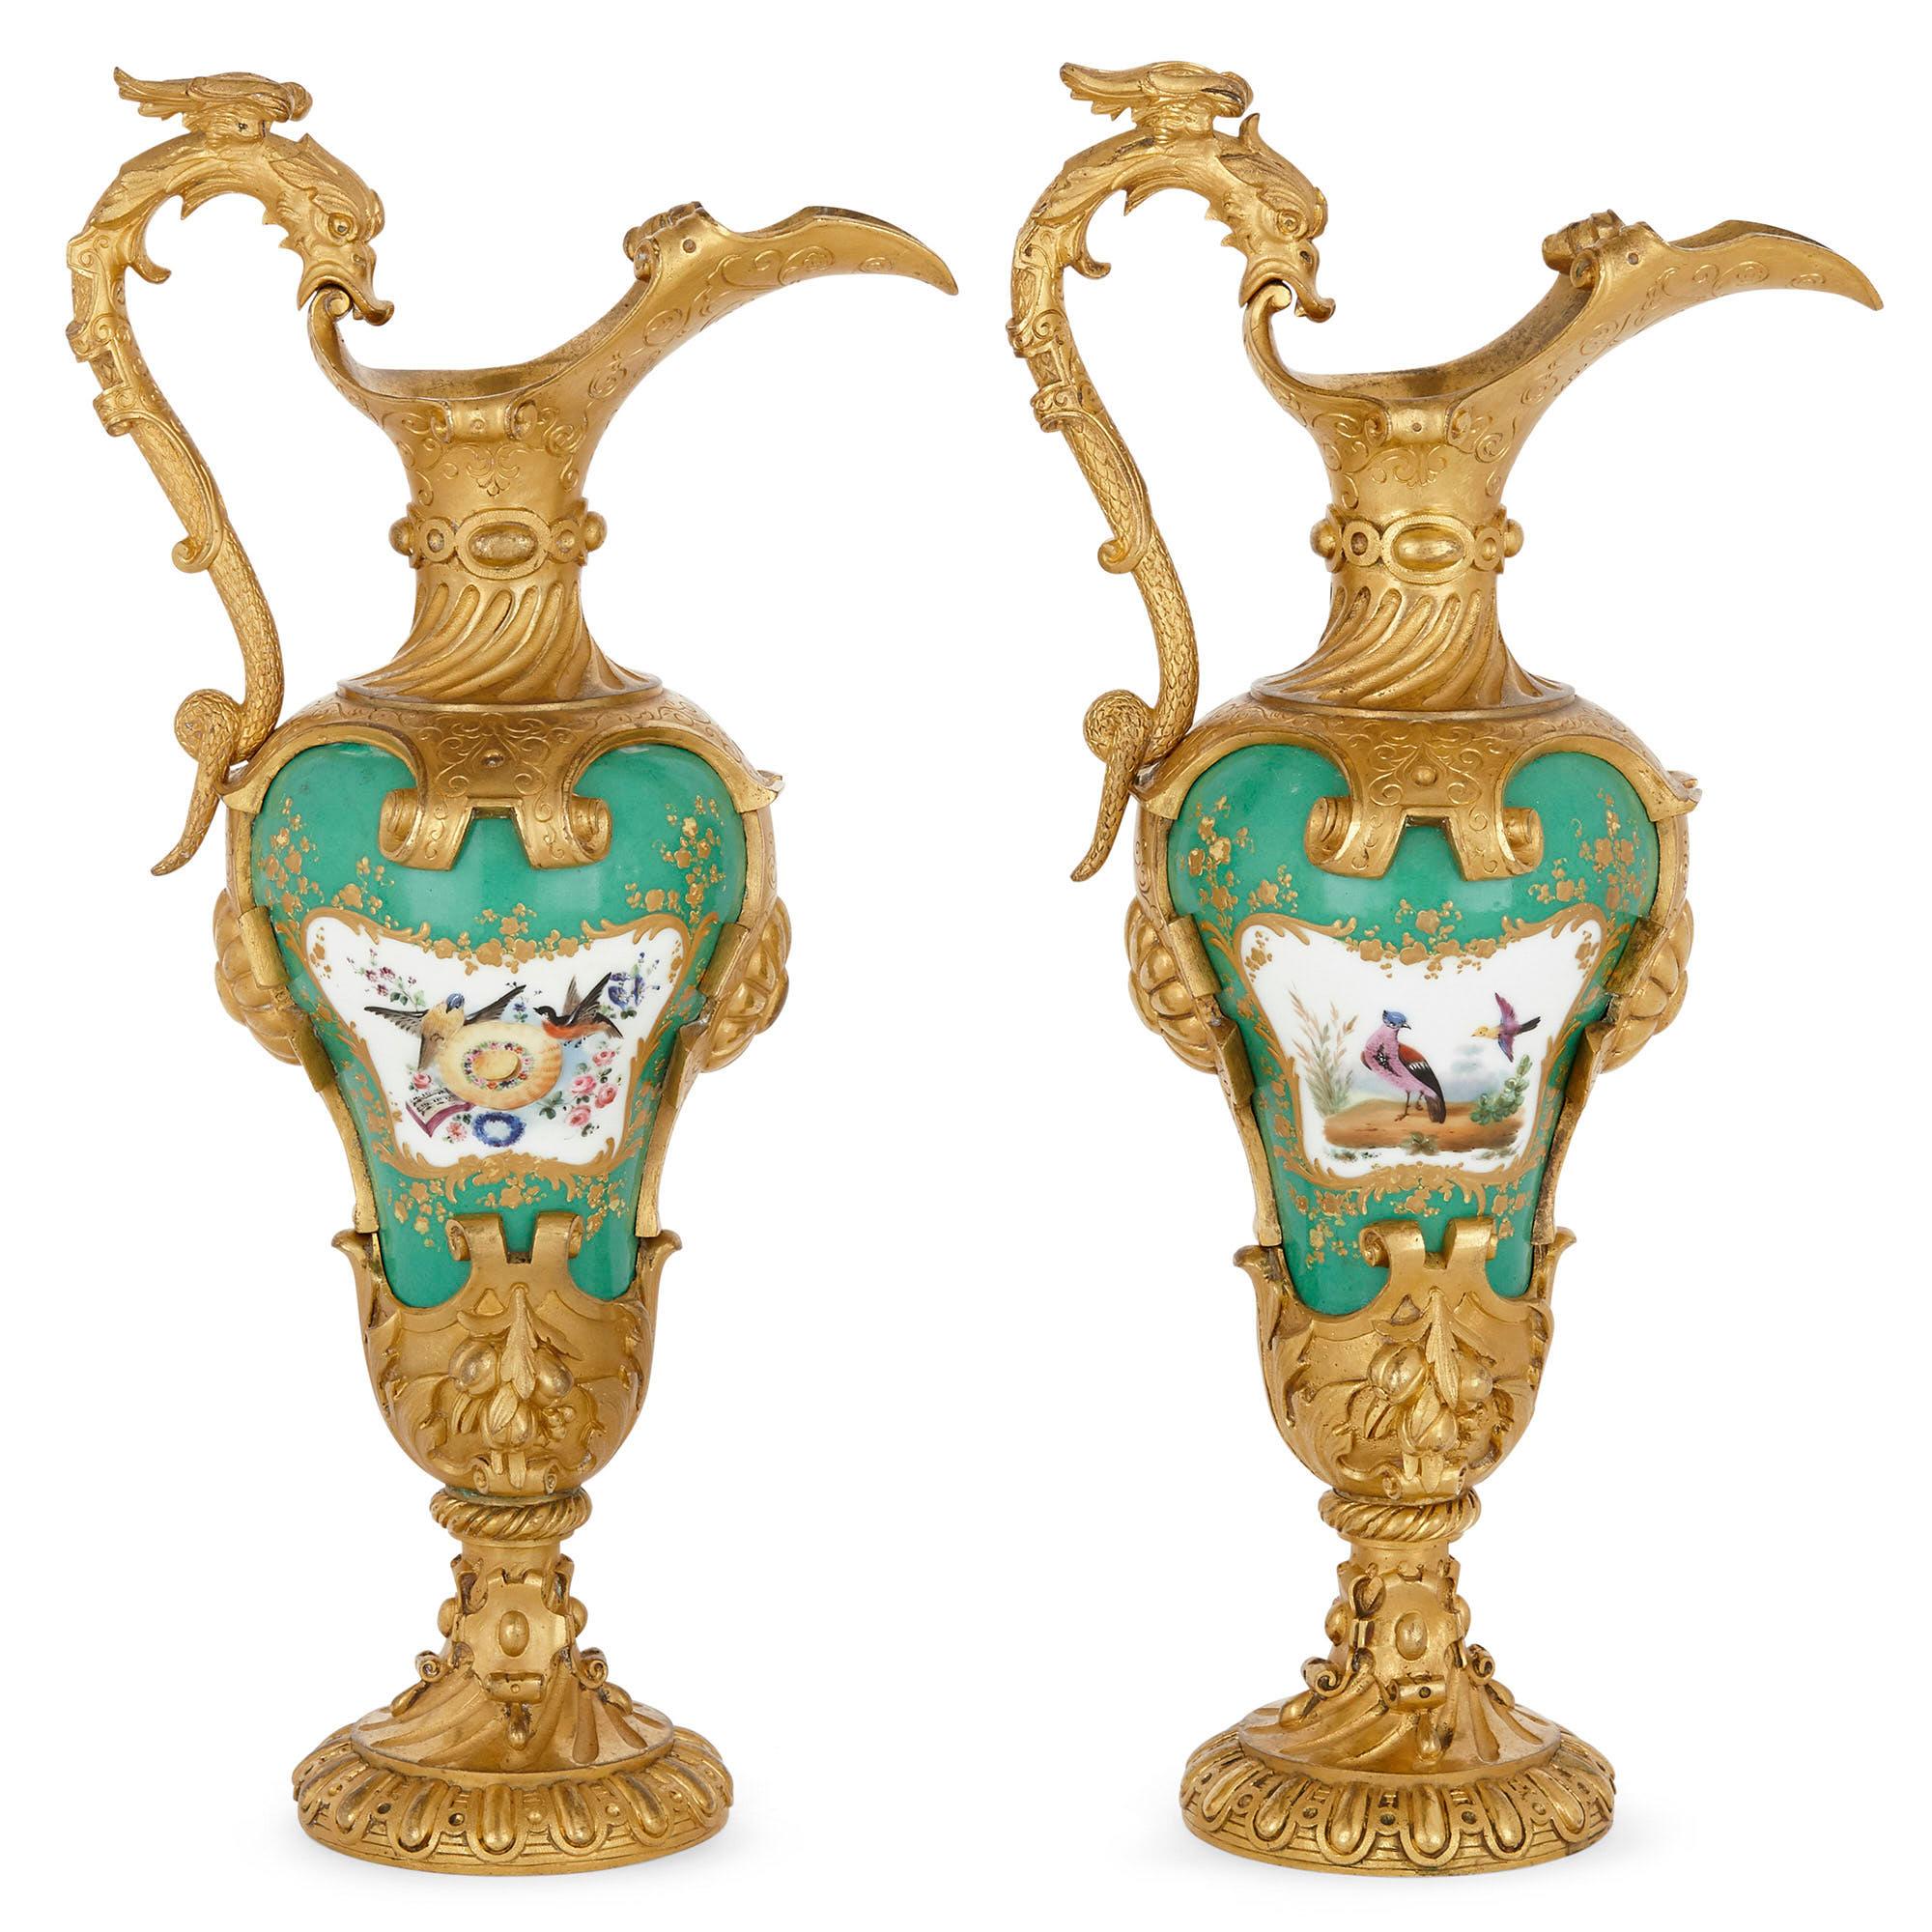 This Sèvres style porcelain vases in this pair are mounted with gilt bronze. The overall design scheme is exceptionally ornate, the bronze casting and the painted porcelain betraying the Louis XV style. Most unusually, each vase is shaped like an